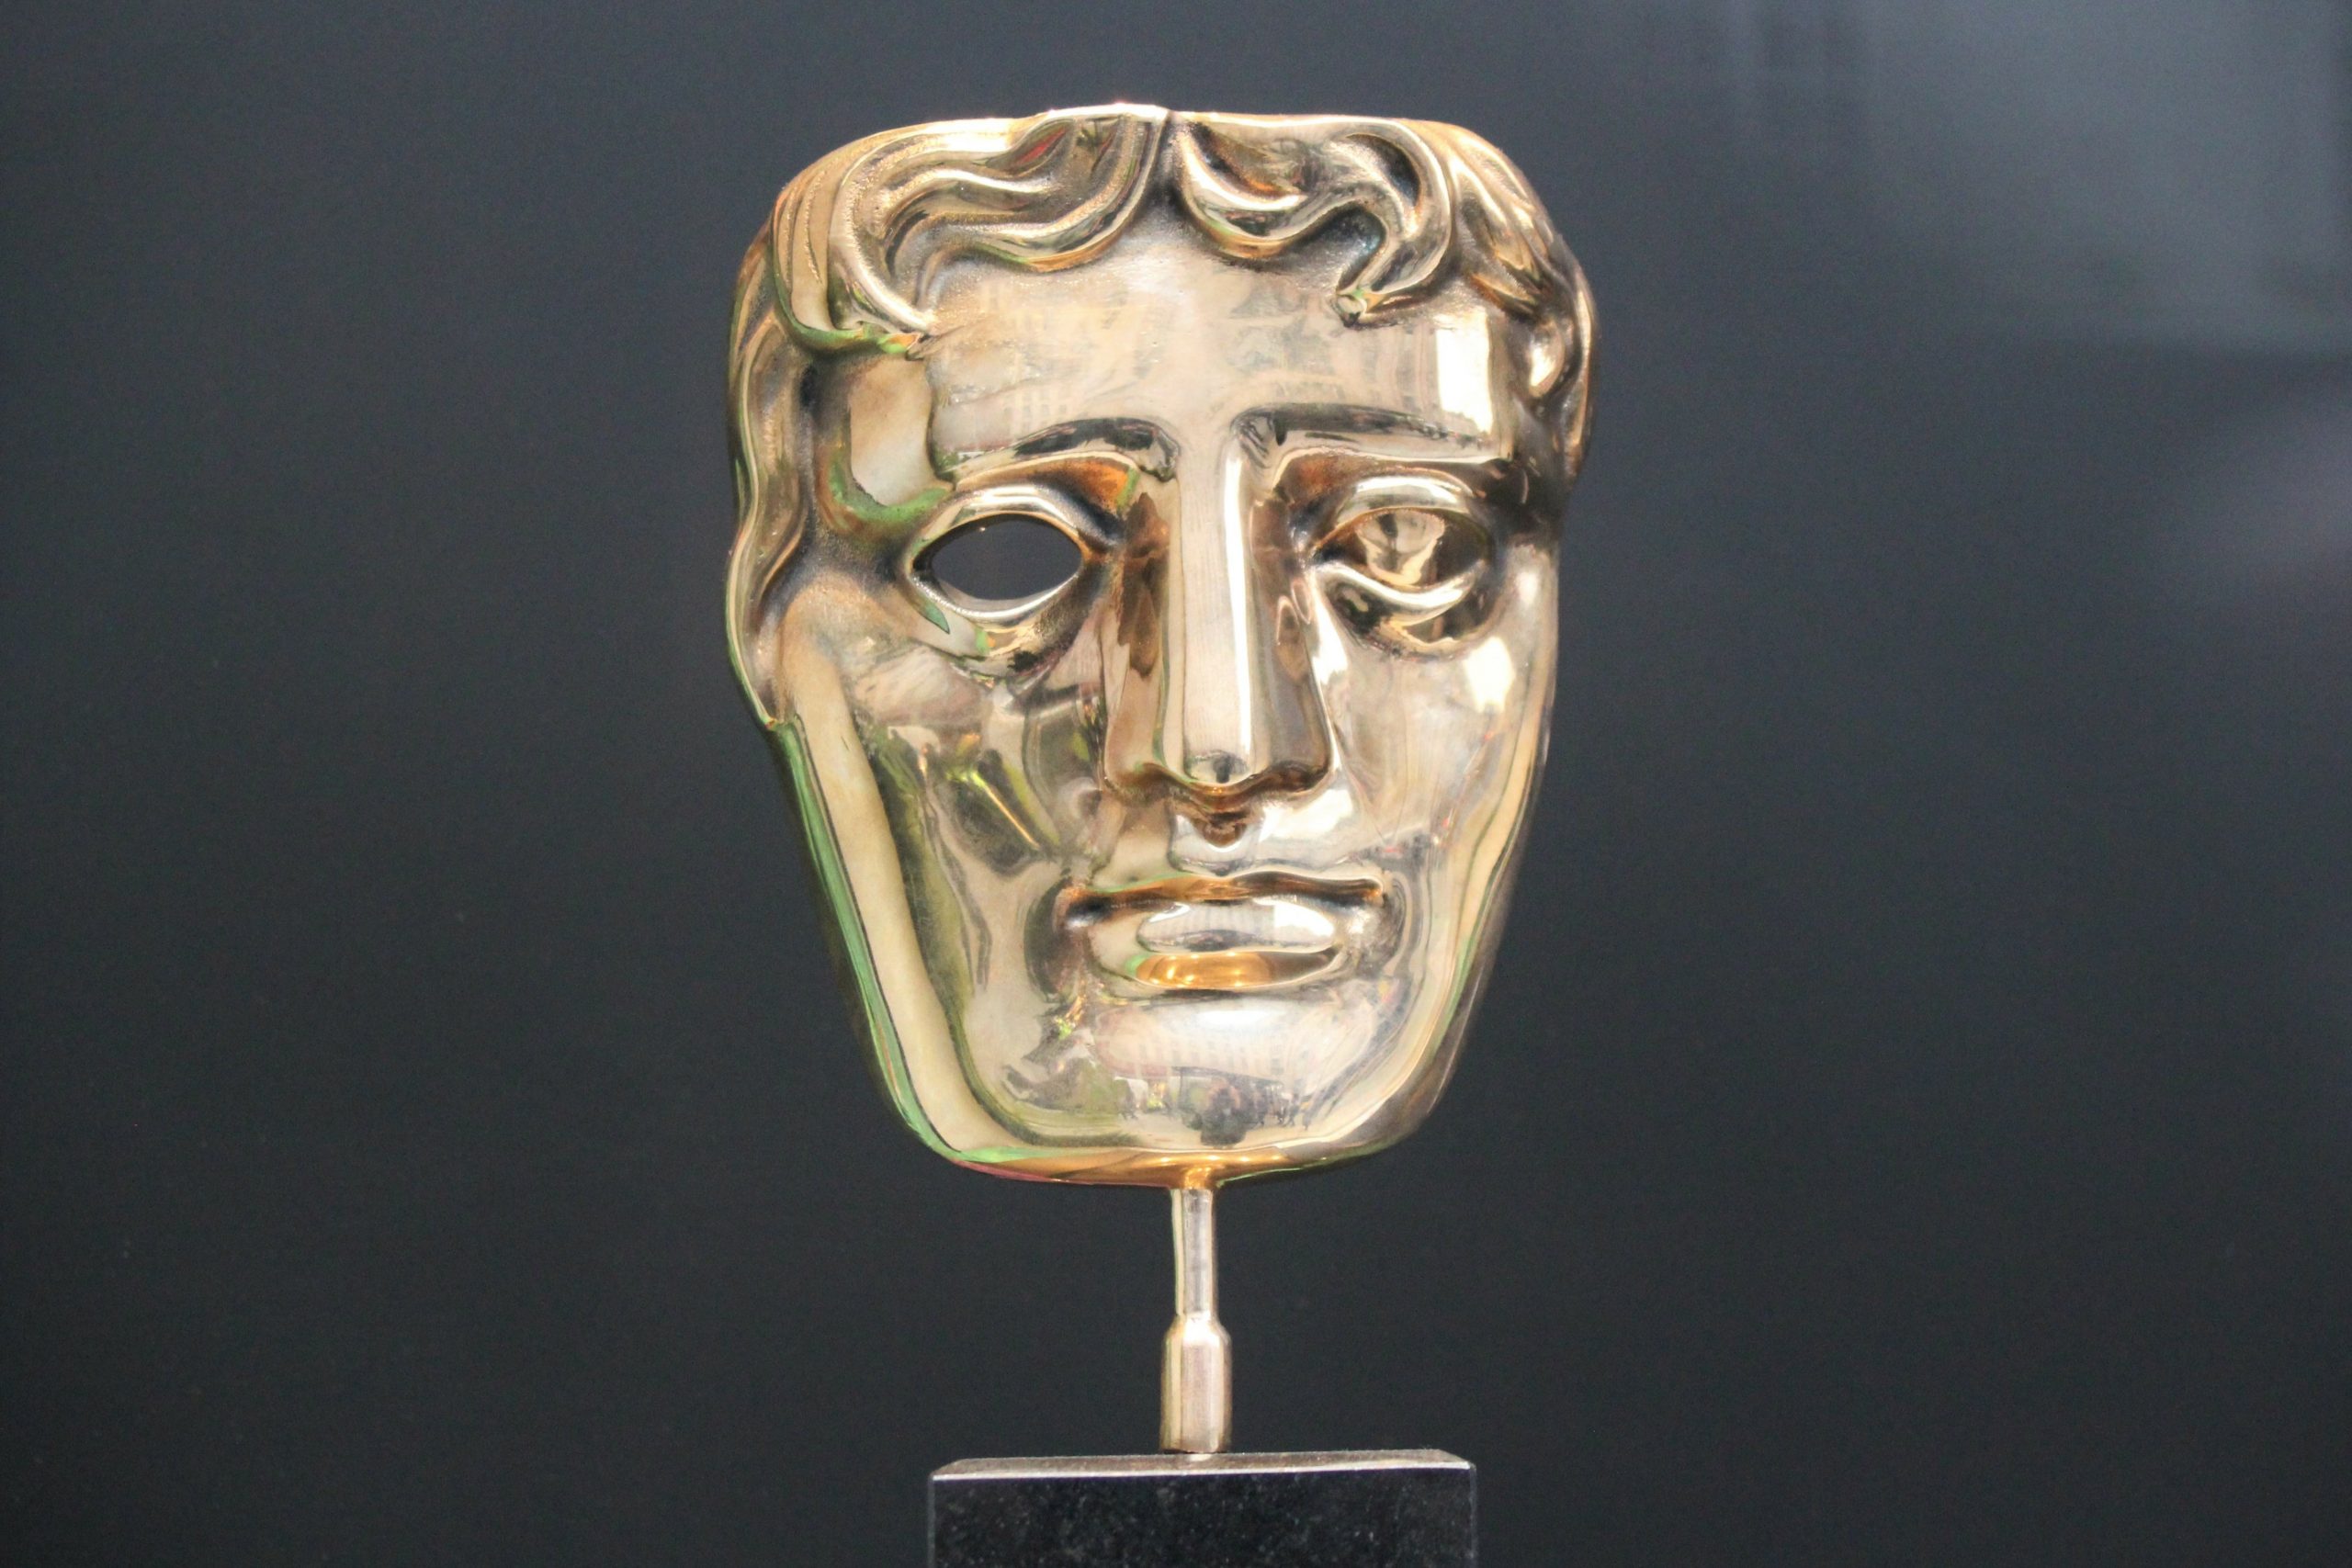 BAFTA awards supplier - gluten free chocolate slabs and artisan chocolates from The Mallow Tailor